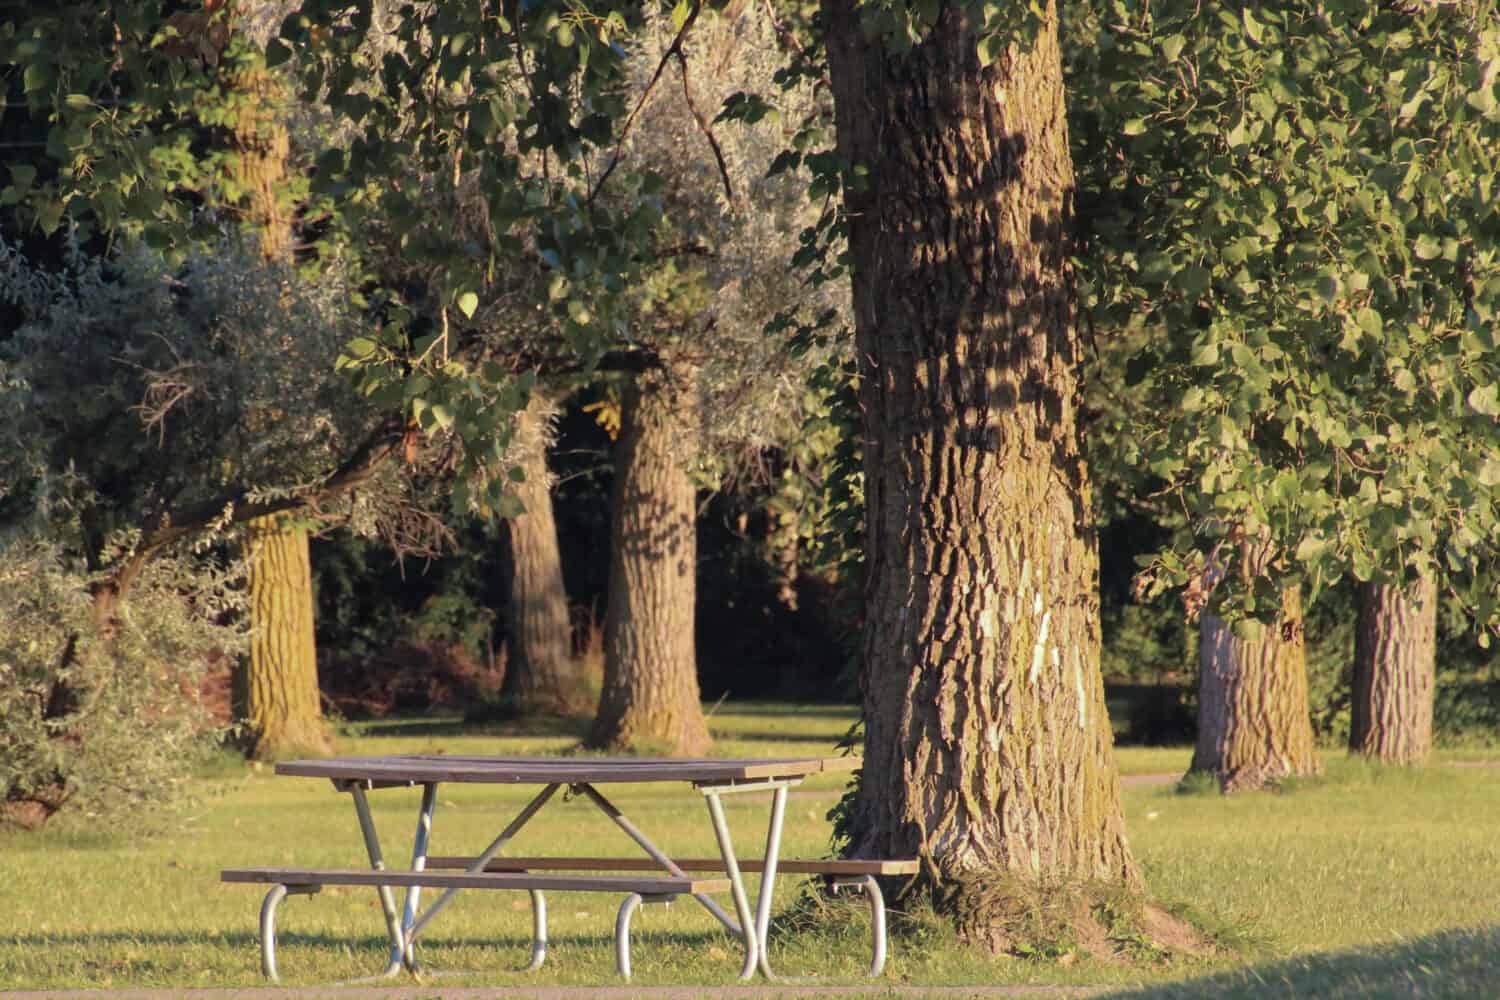 Picnic table under a tree in Rotary Park, Livonia, Michigan